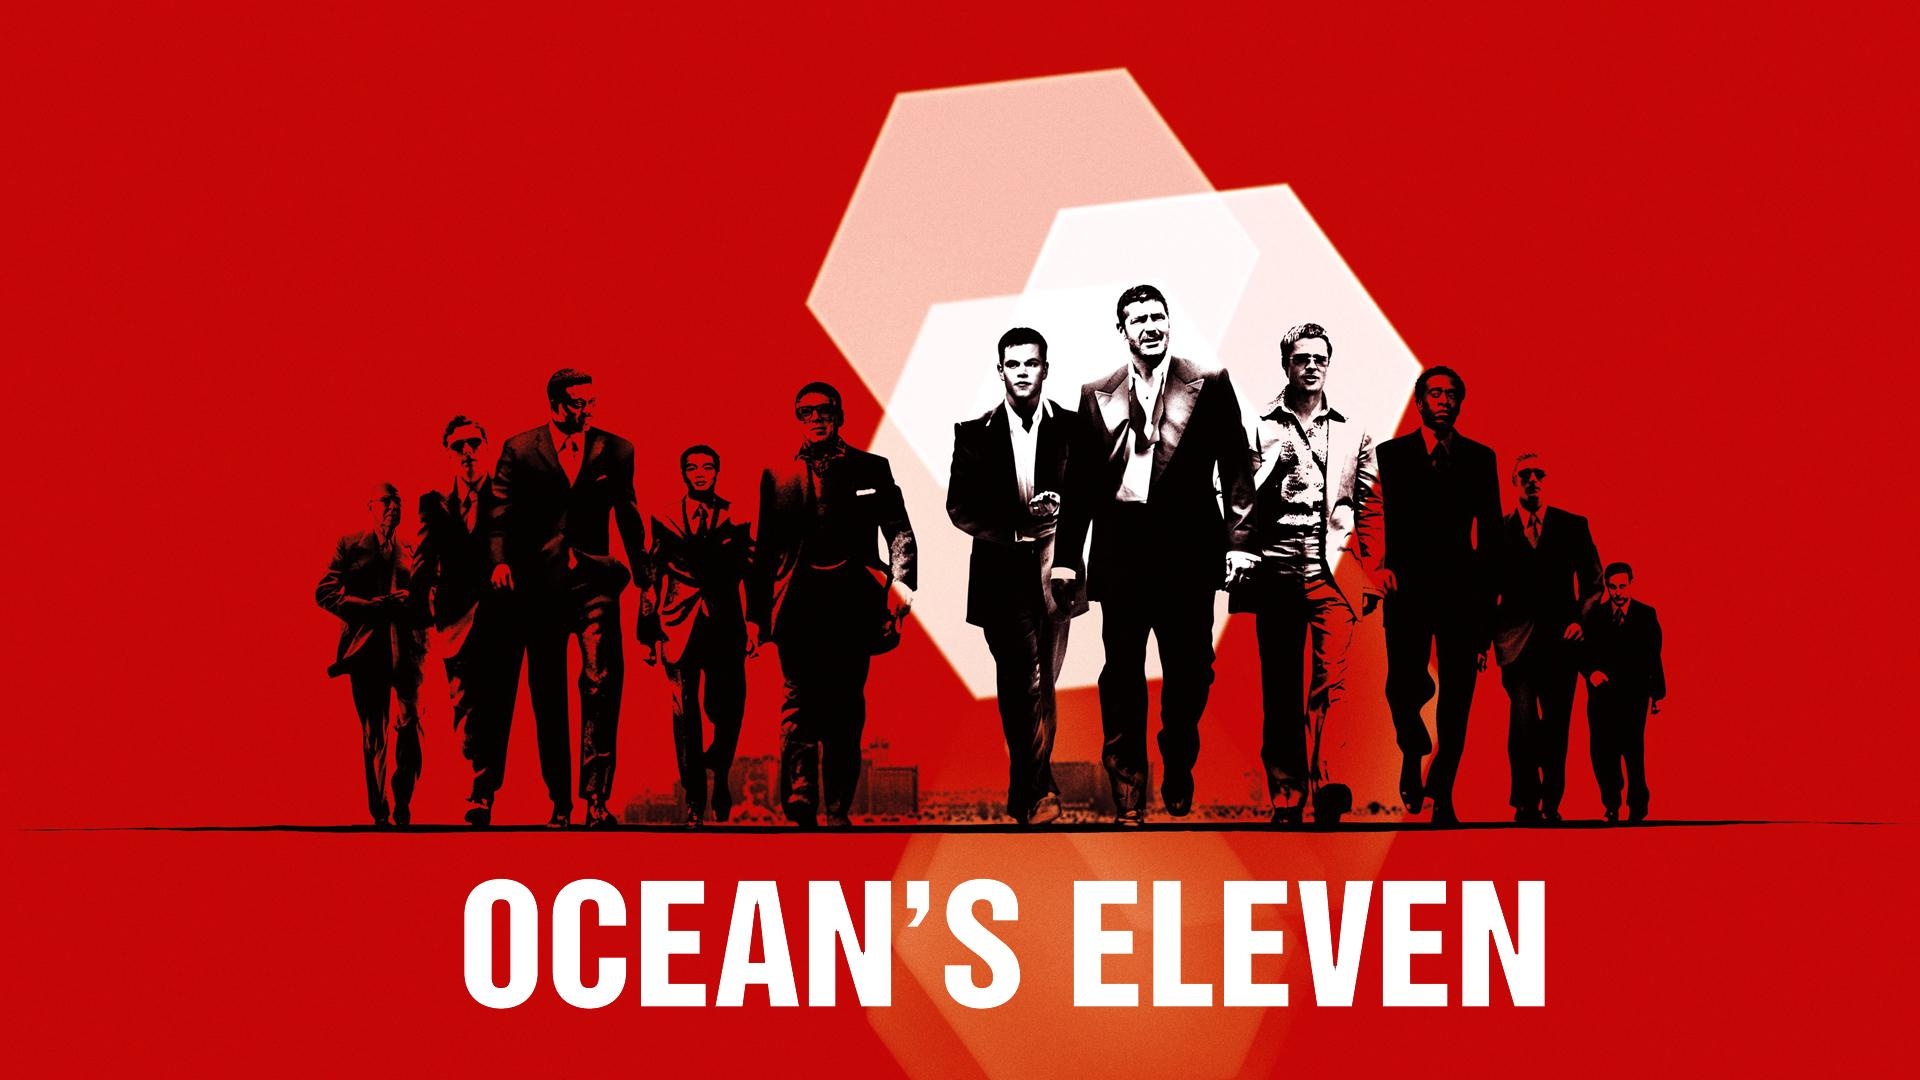 Ocean's Eleven: A remake of the 1960 Rat Pack film of the same name. 1920x1080 Full HD Wallpaper.